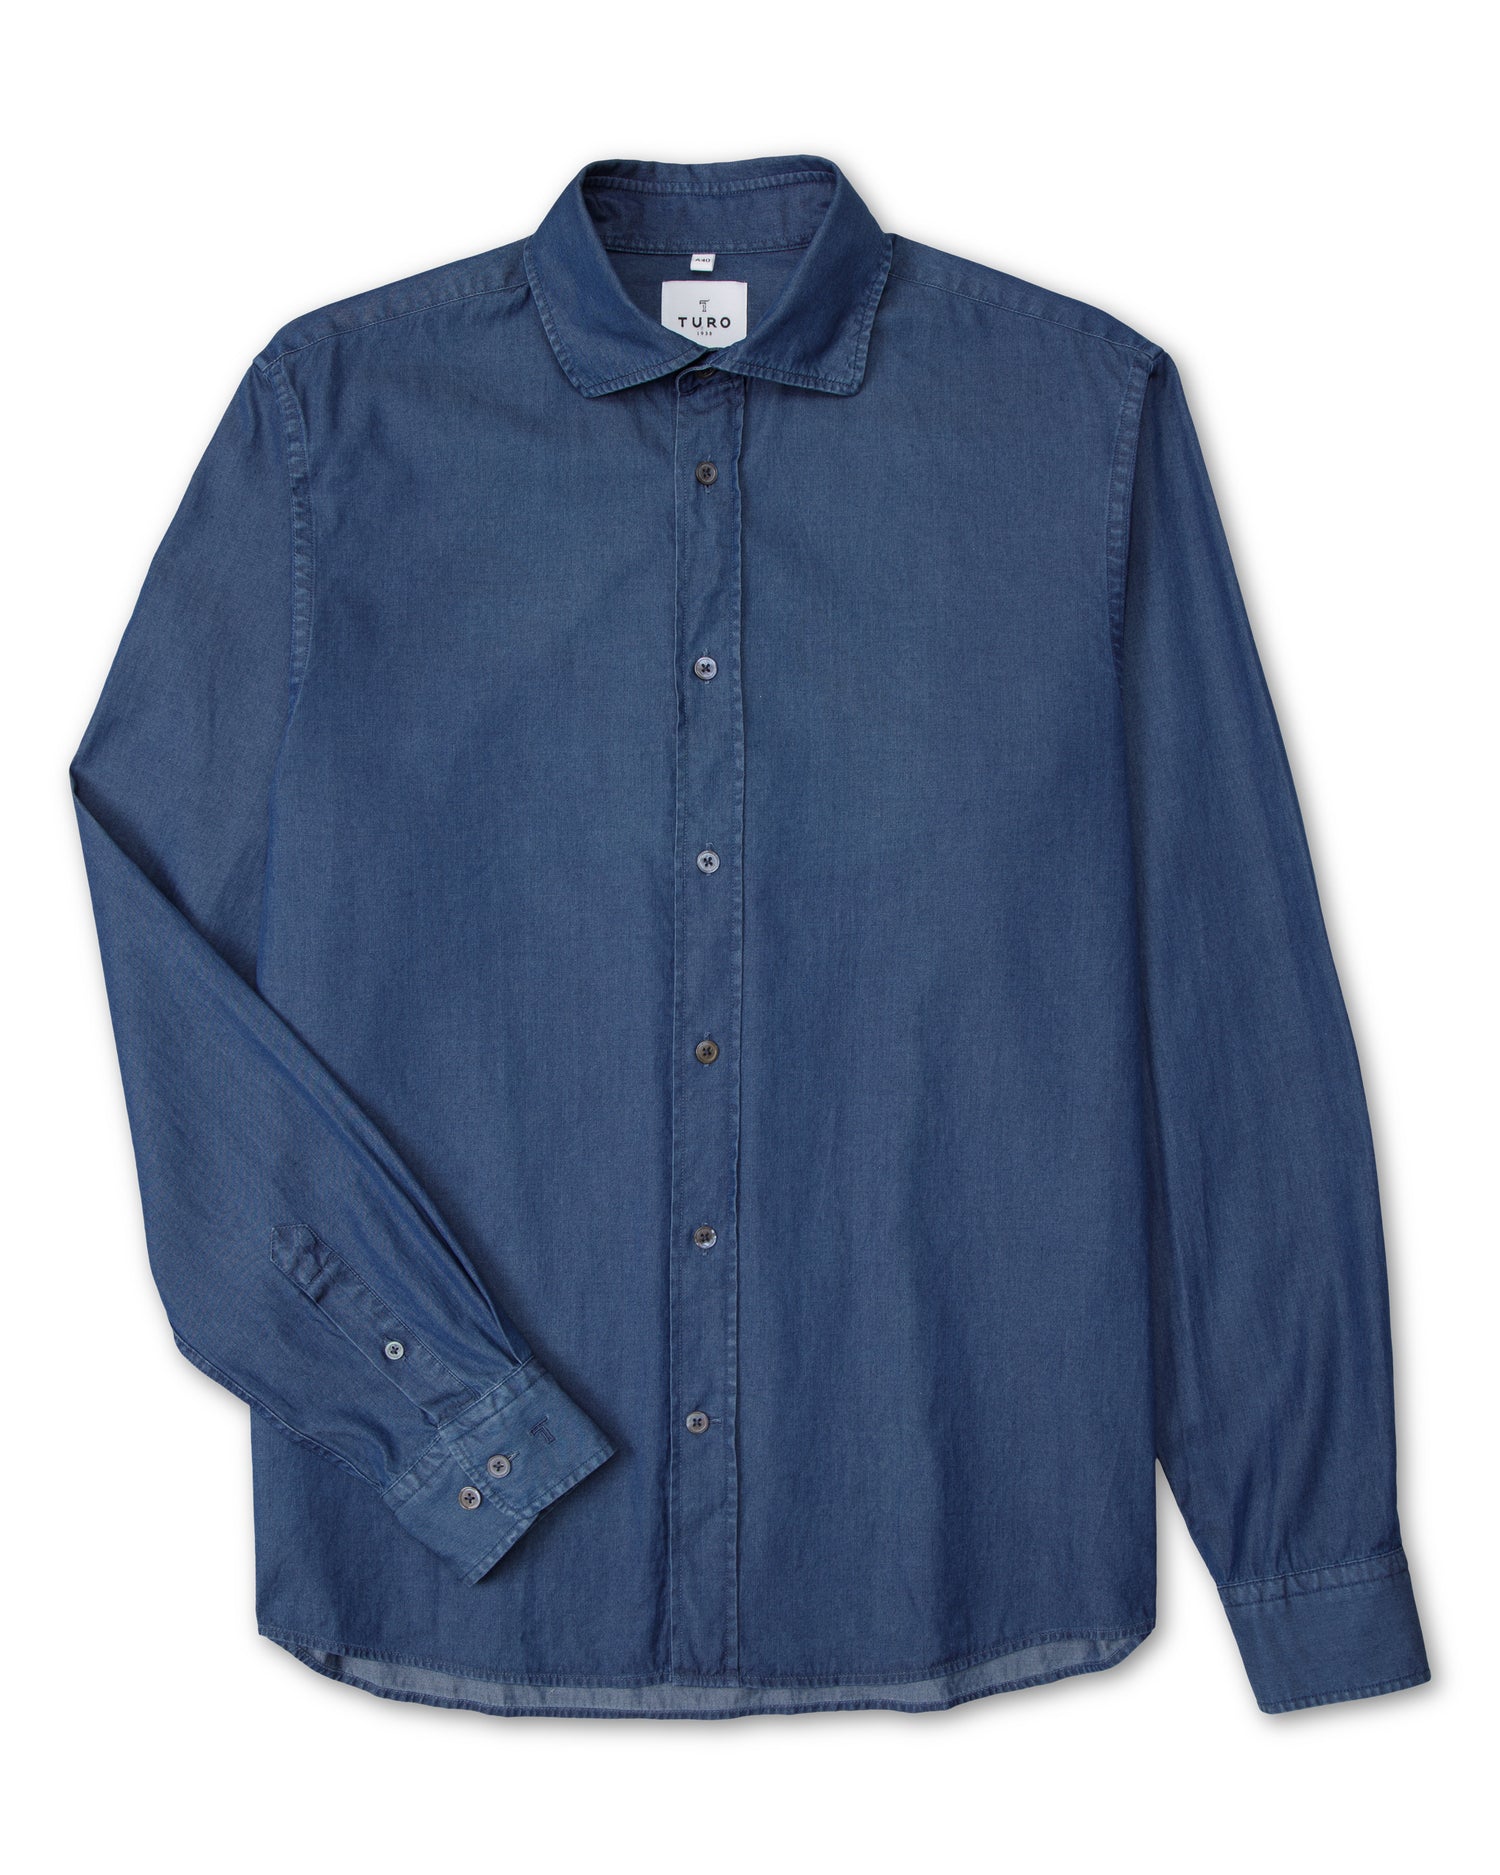 Blue Chambray Shirt in Slim fit (8458959126858)